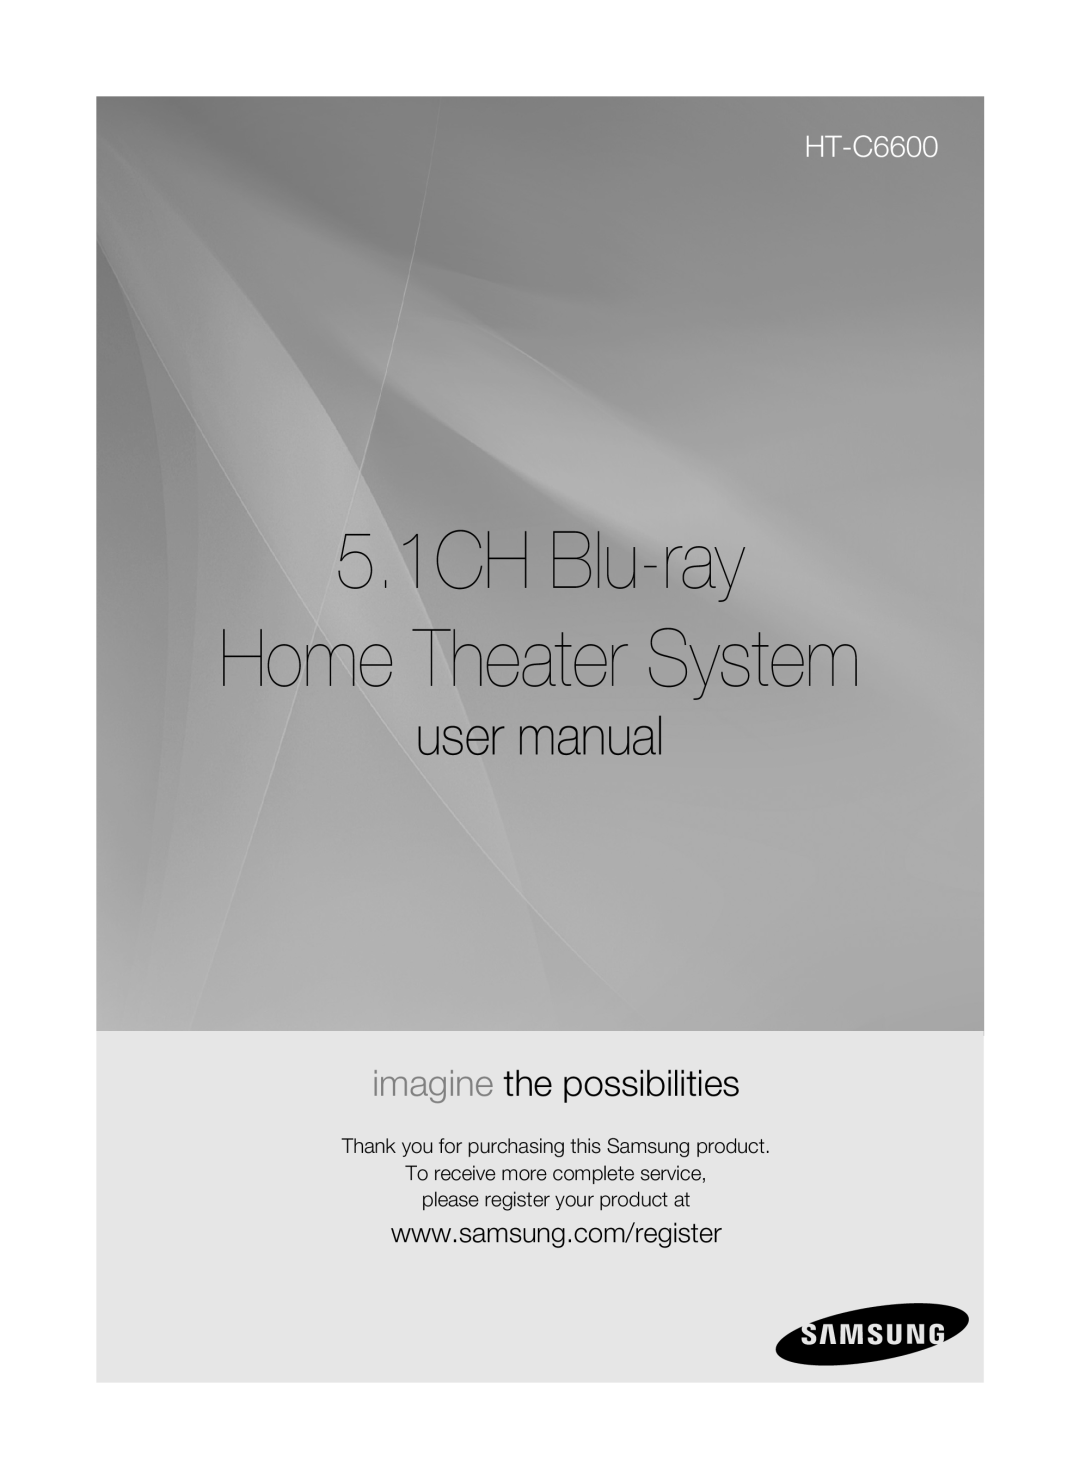 Samsung user manual Thank you for purchasing this Samsung product, To receive more complete service, HT-C6600 